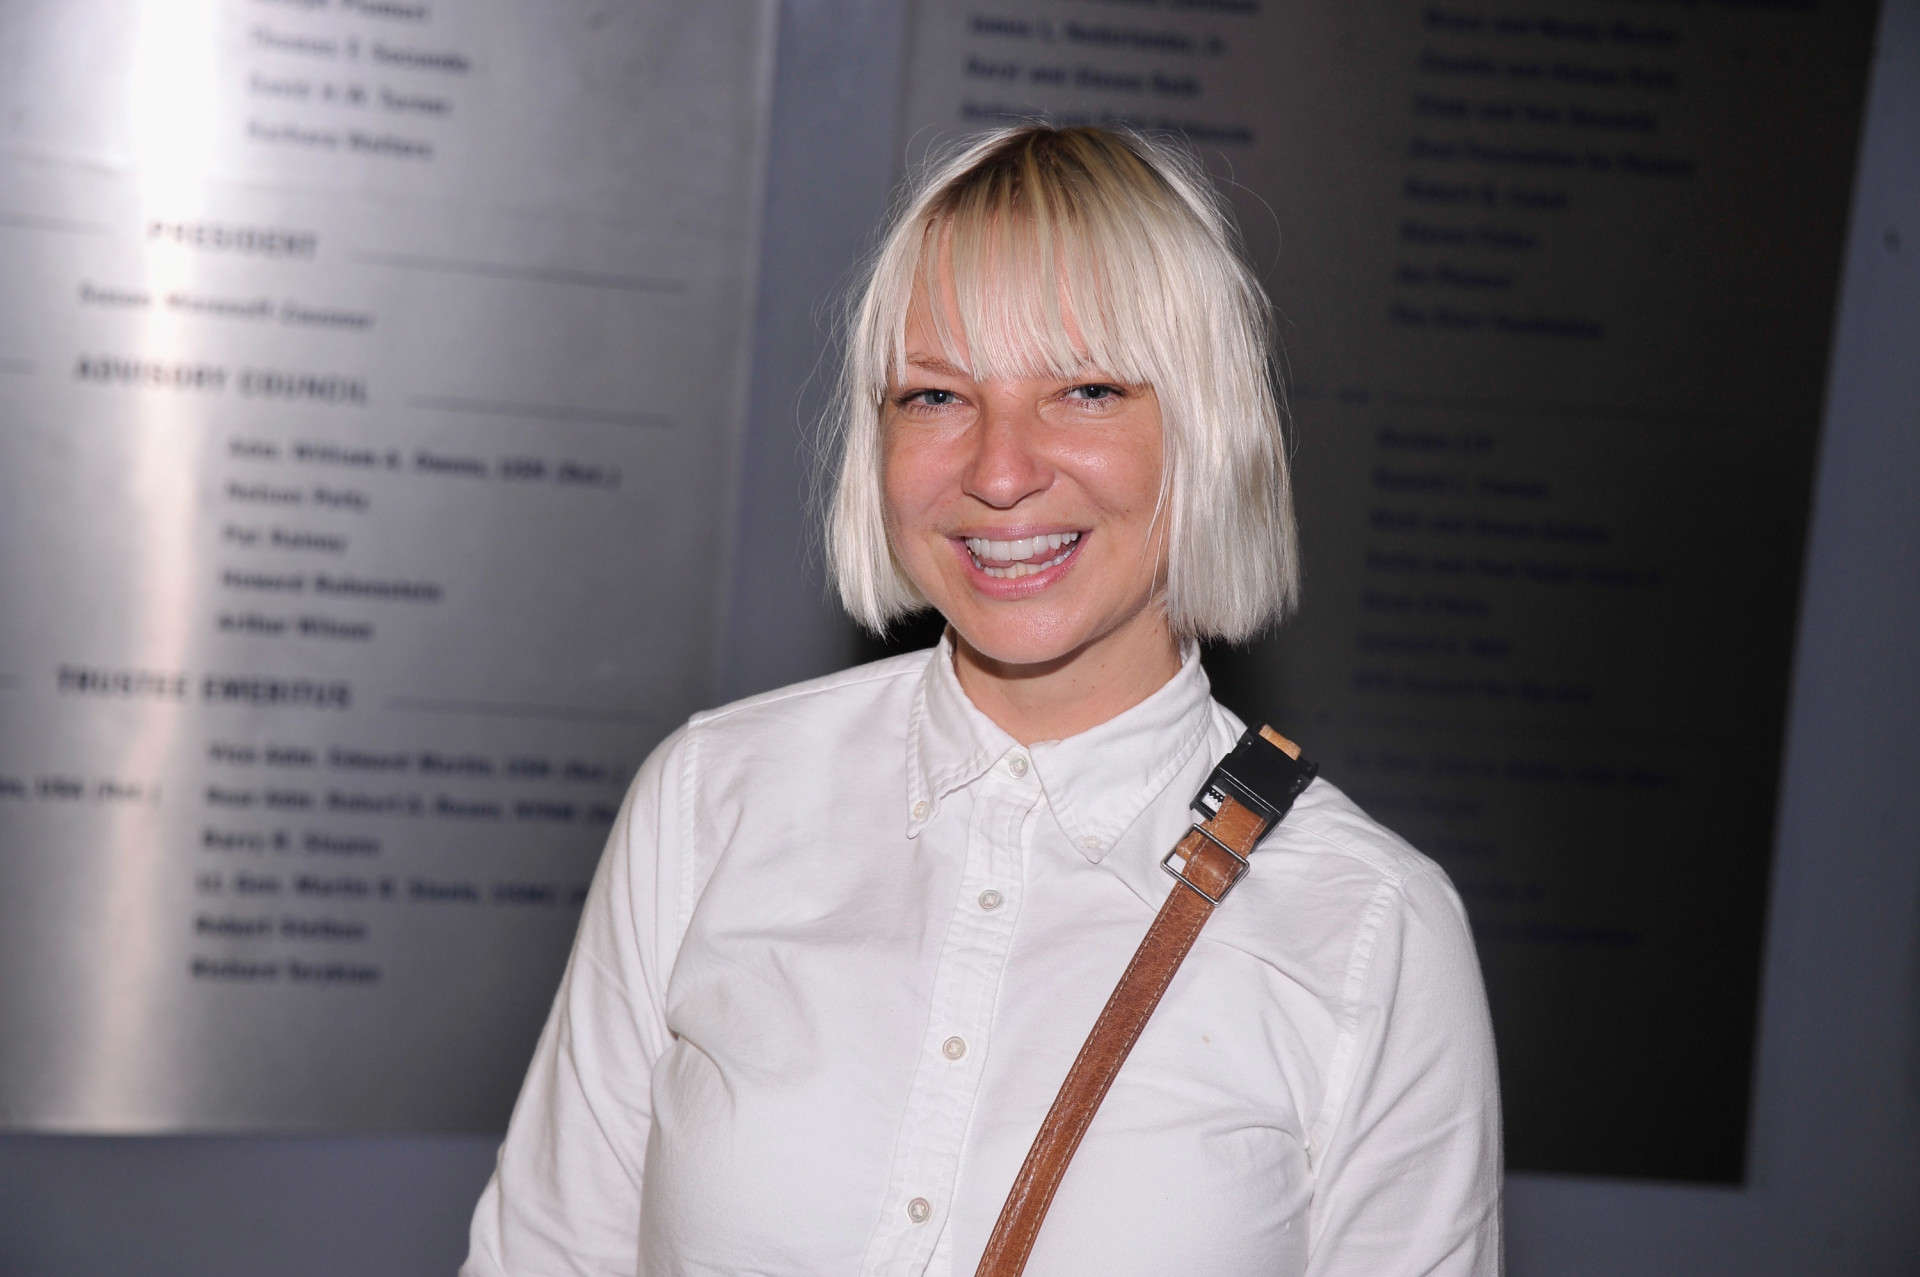 Sia reveals she is on autism spectrum two years after 'Music' casting controversy